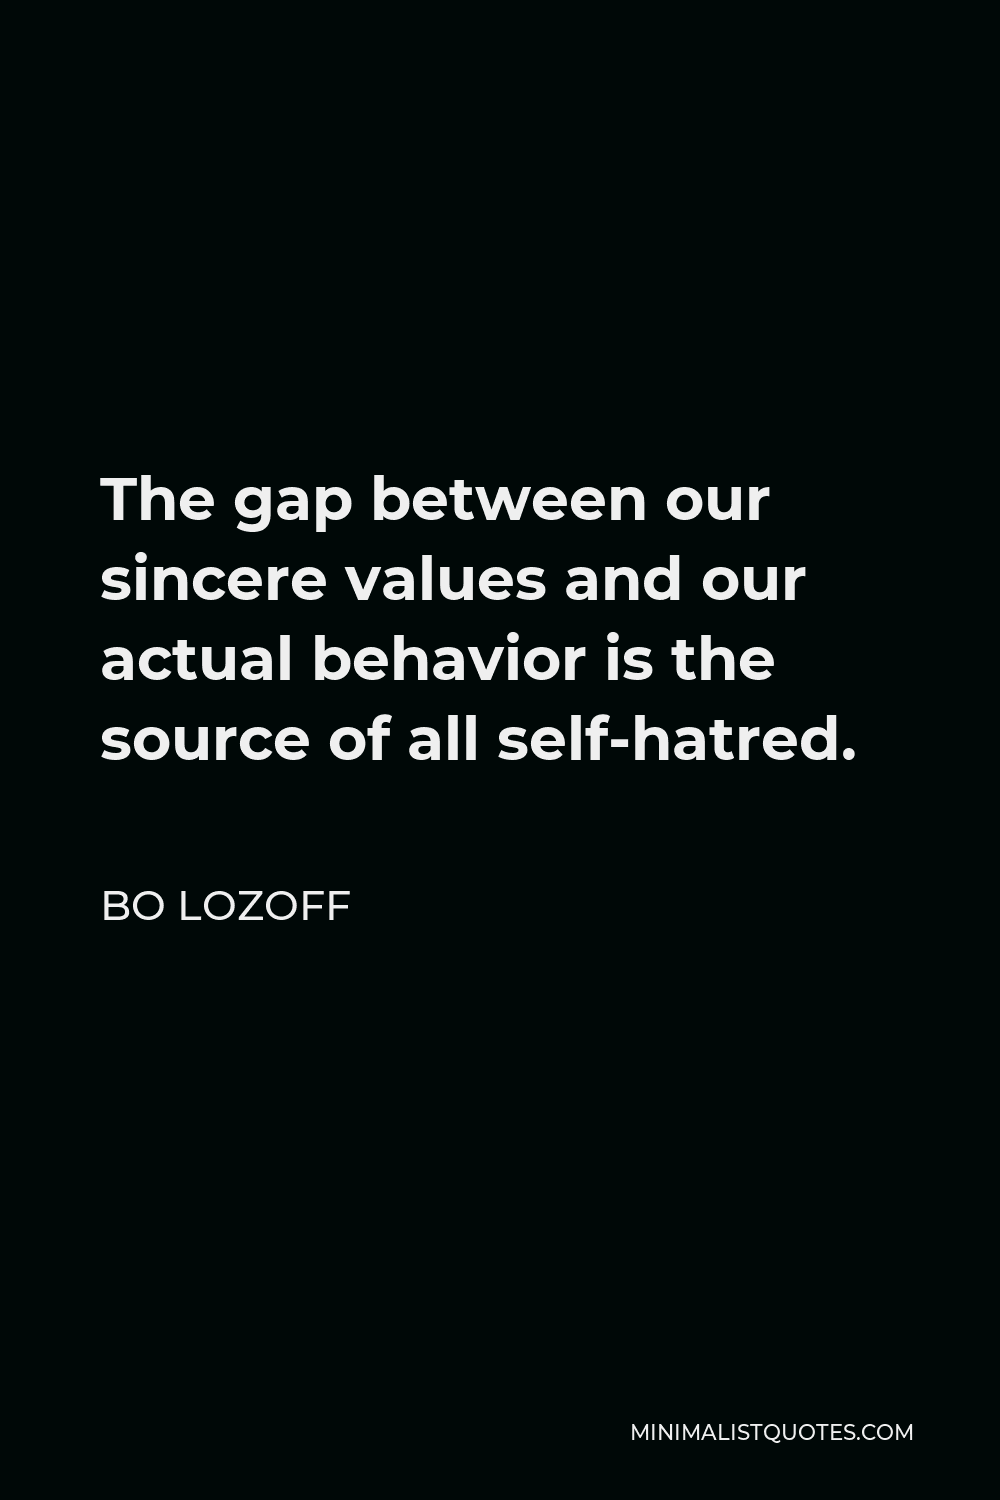 Bo Lozoff Quote - The gap between our sincere values and our actual behavior is the source of all self-hatred.